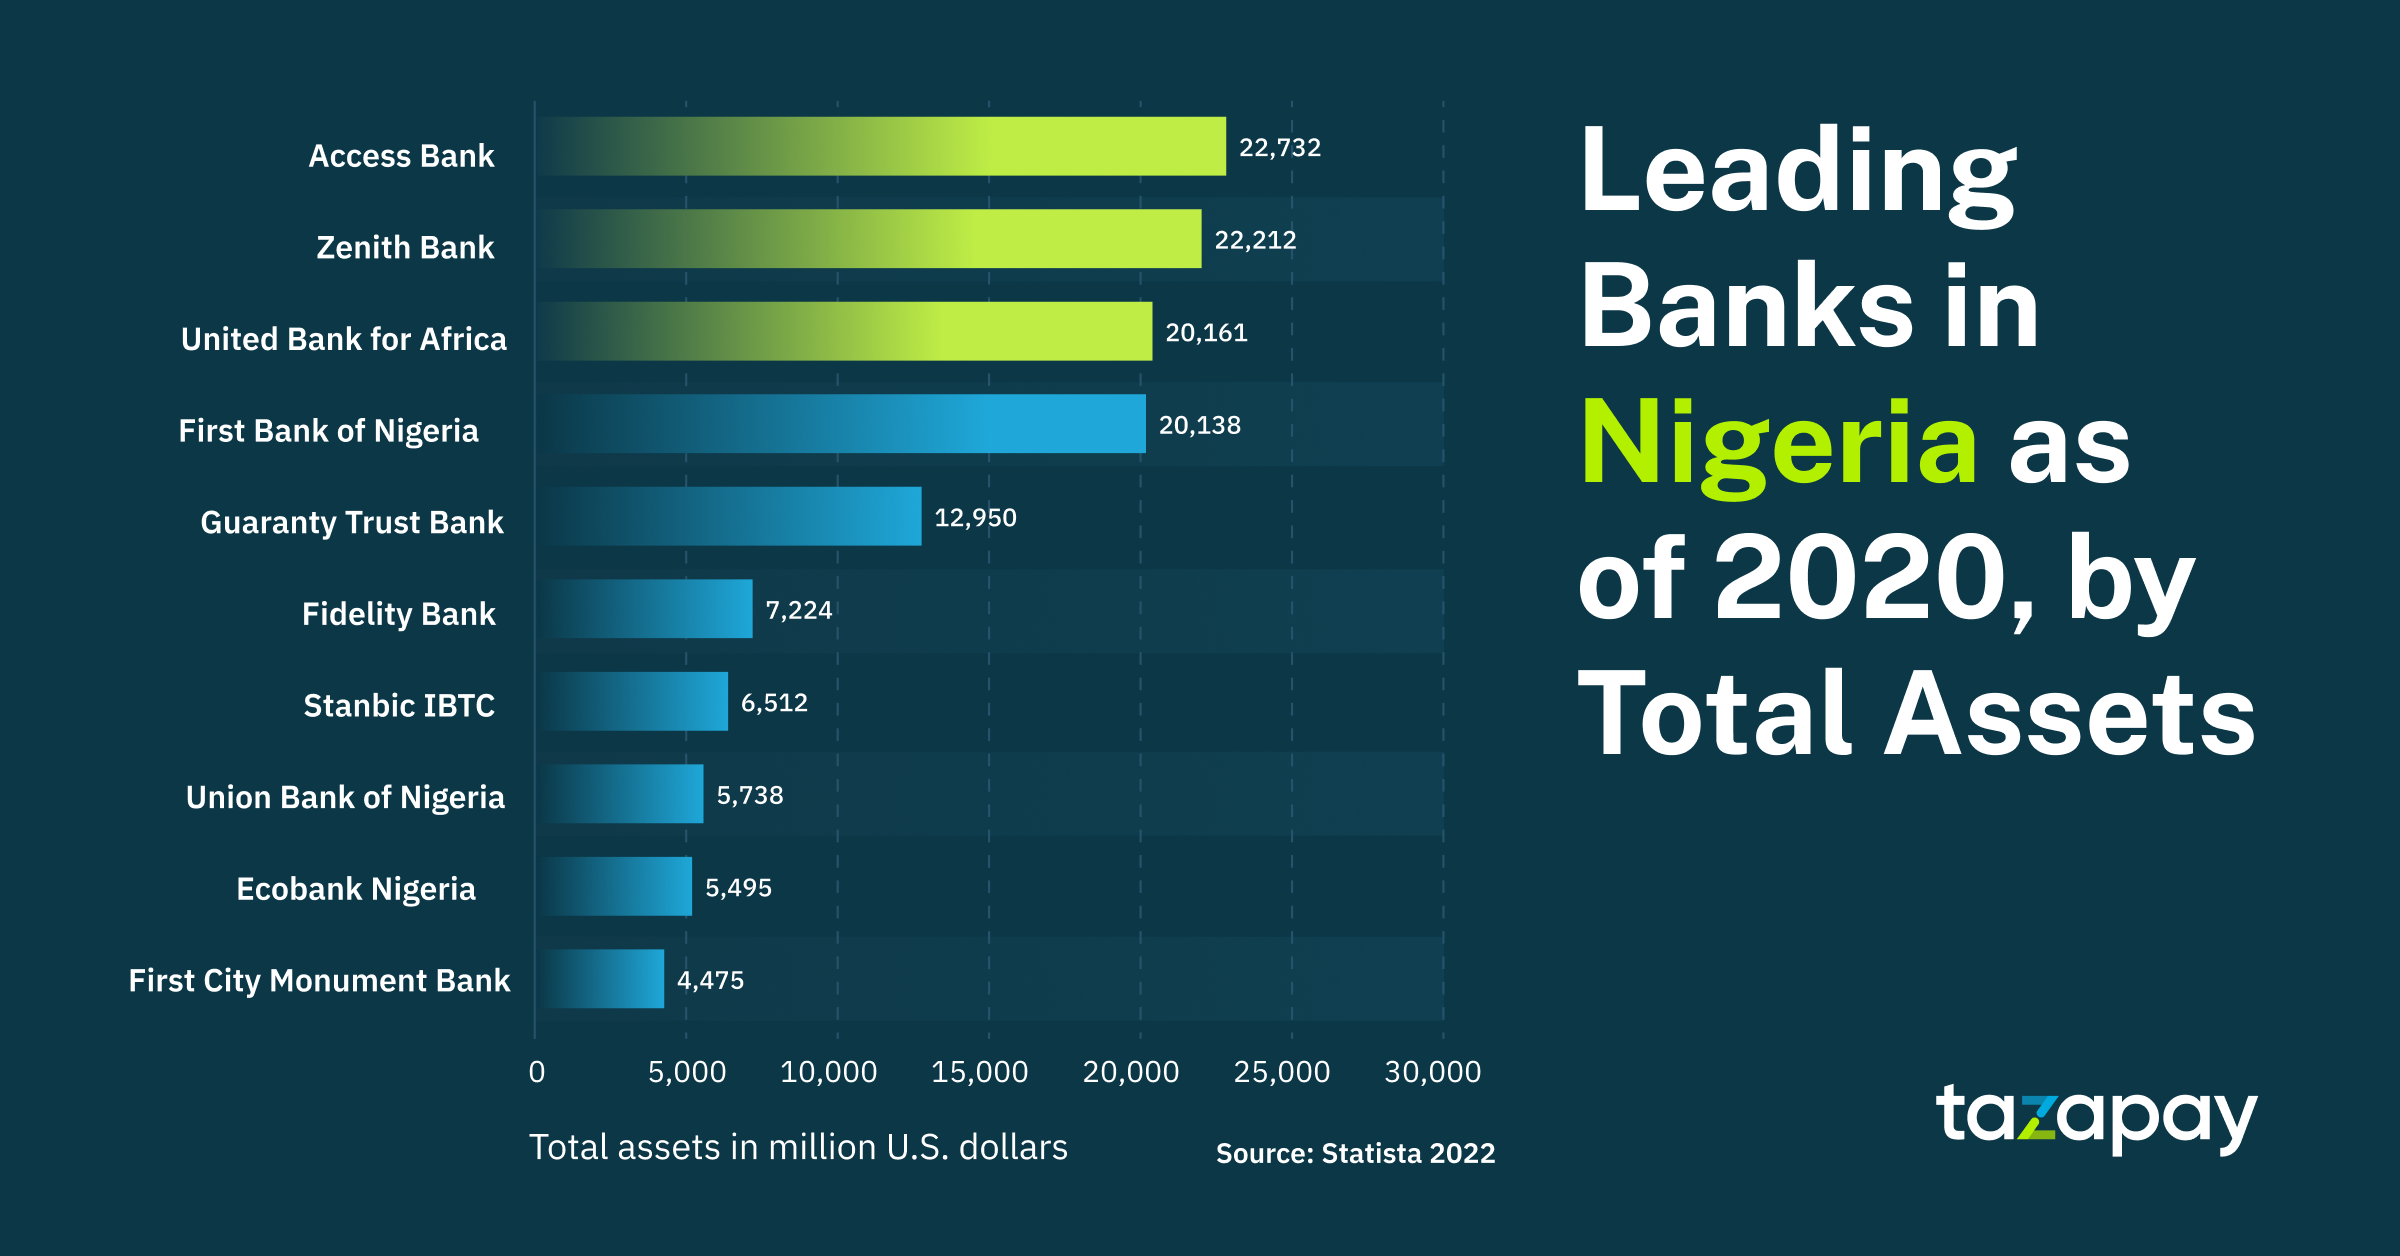 leading banks in Nigeria as of 2020 by Total Assets. Source: Statista